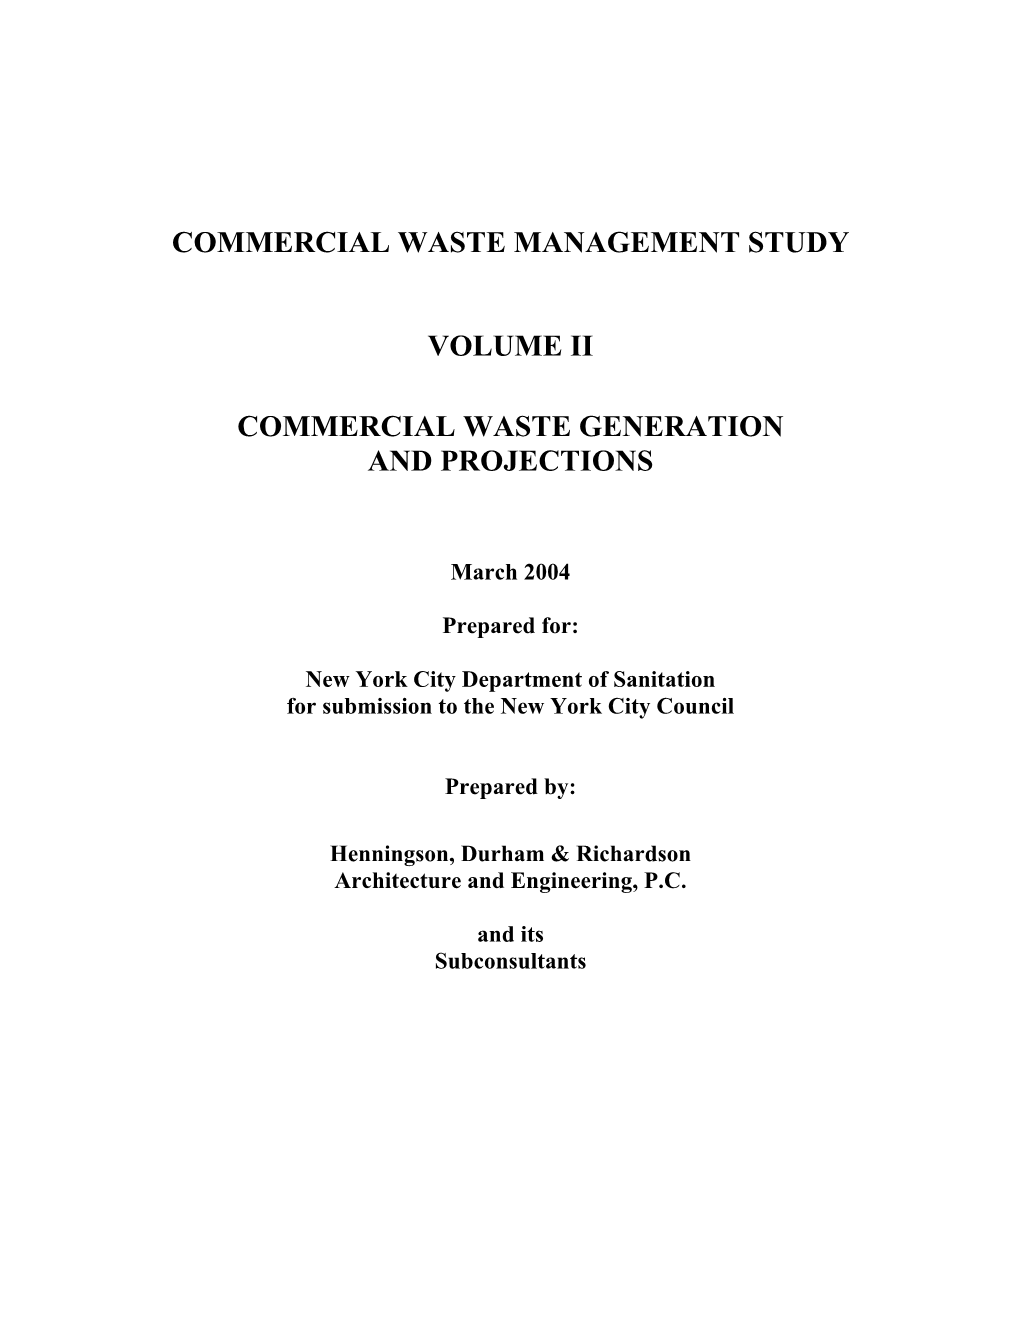 Commercial Waste Generation and Projections